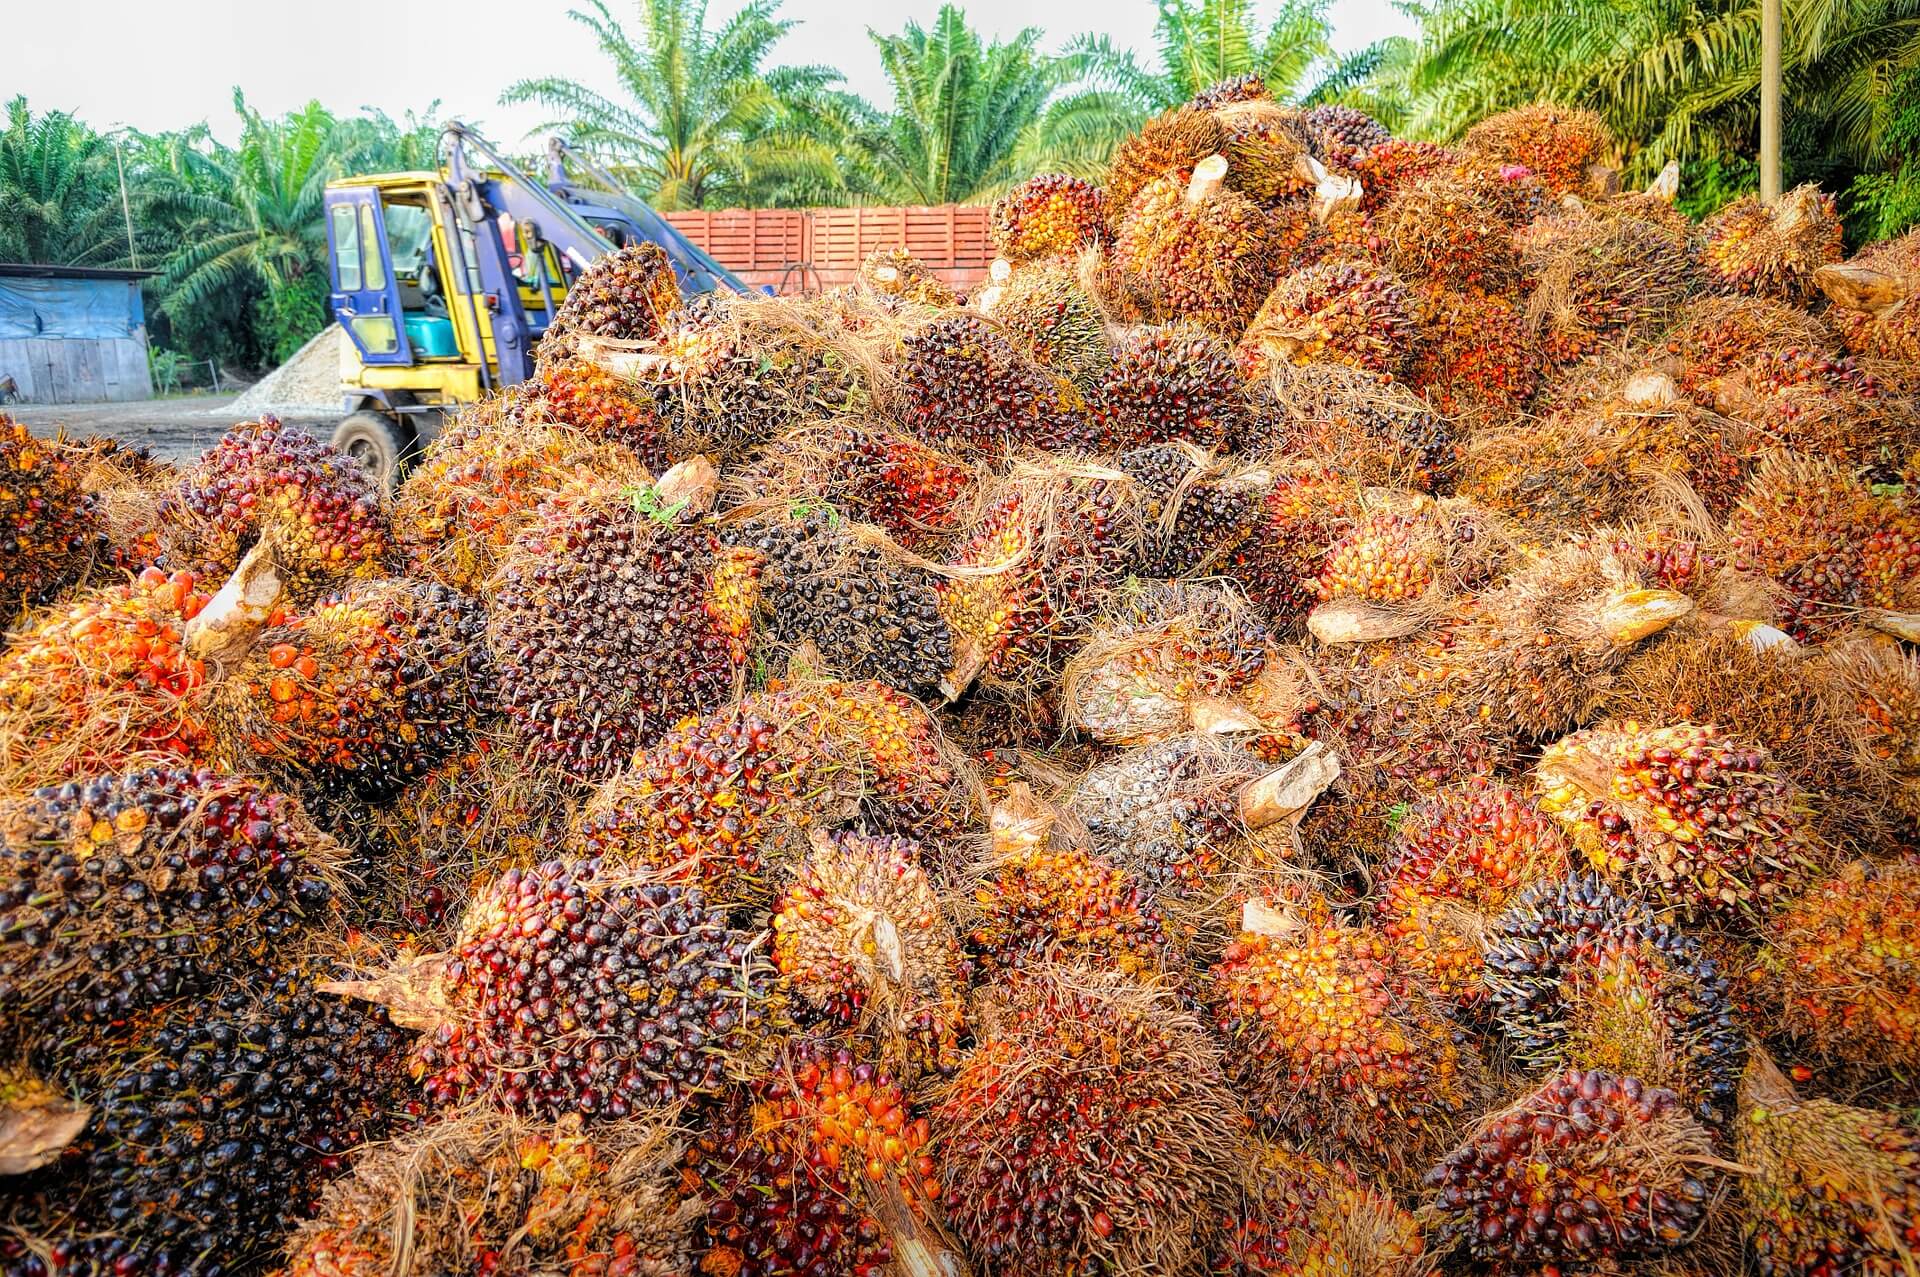 stages of palm oil inspection photo